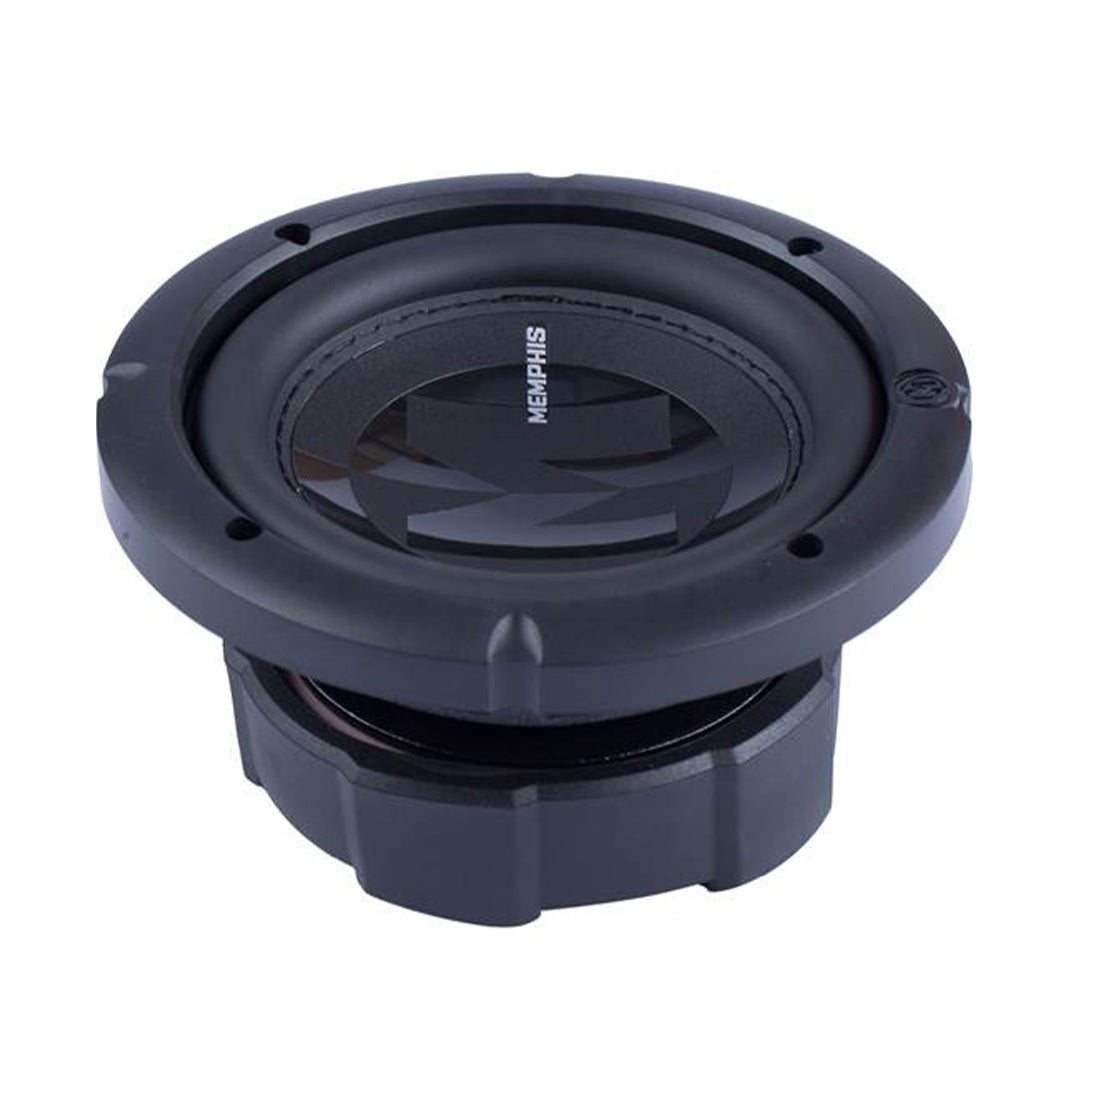 Memphis Audio PRX624 Power Reference 6.5" DVC Component Subwoofer – Selectable 2 or 4-ohm Impedance